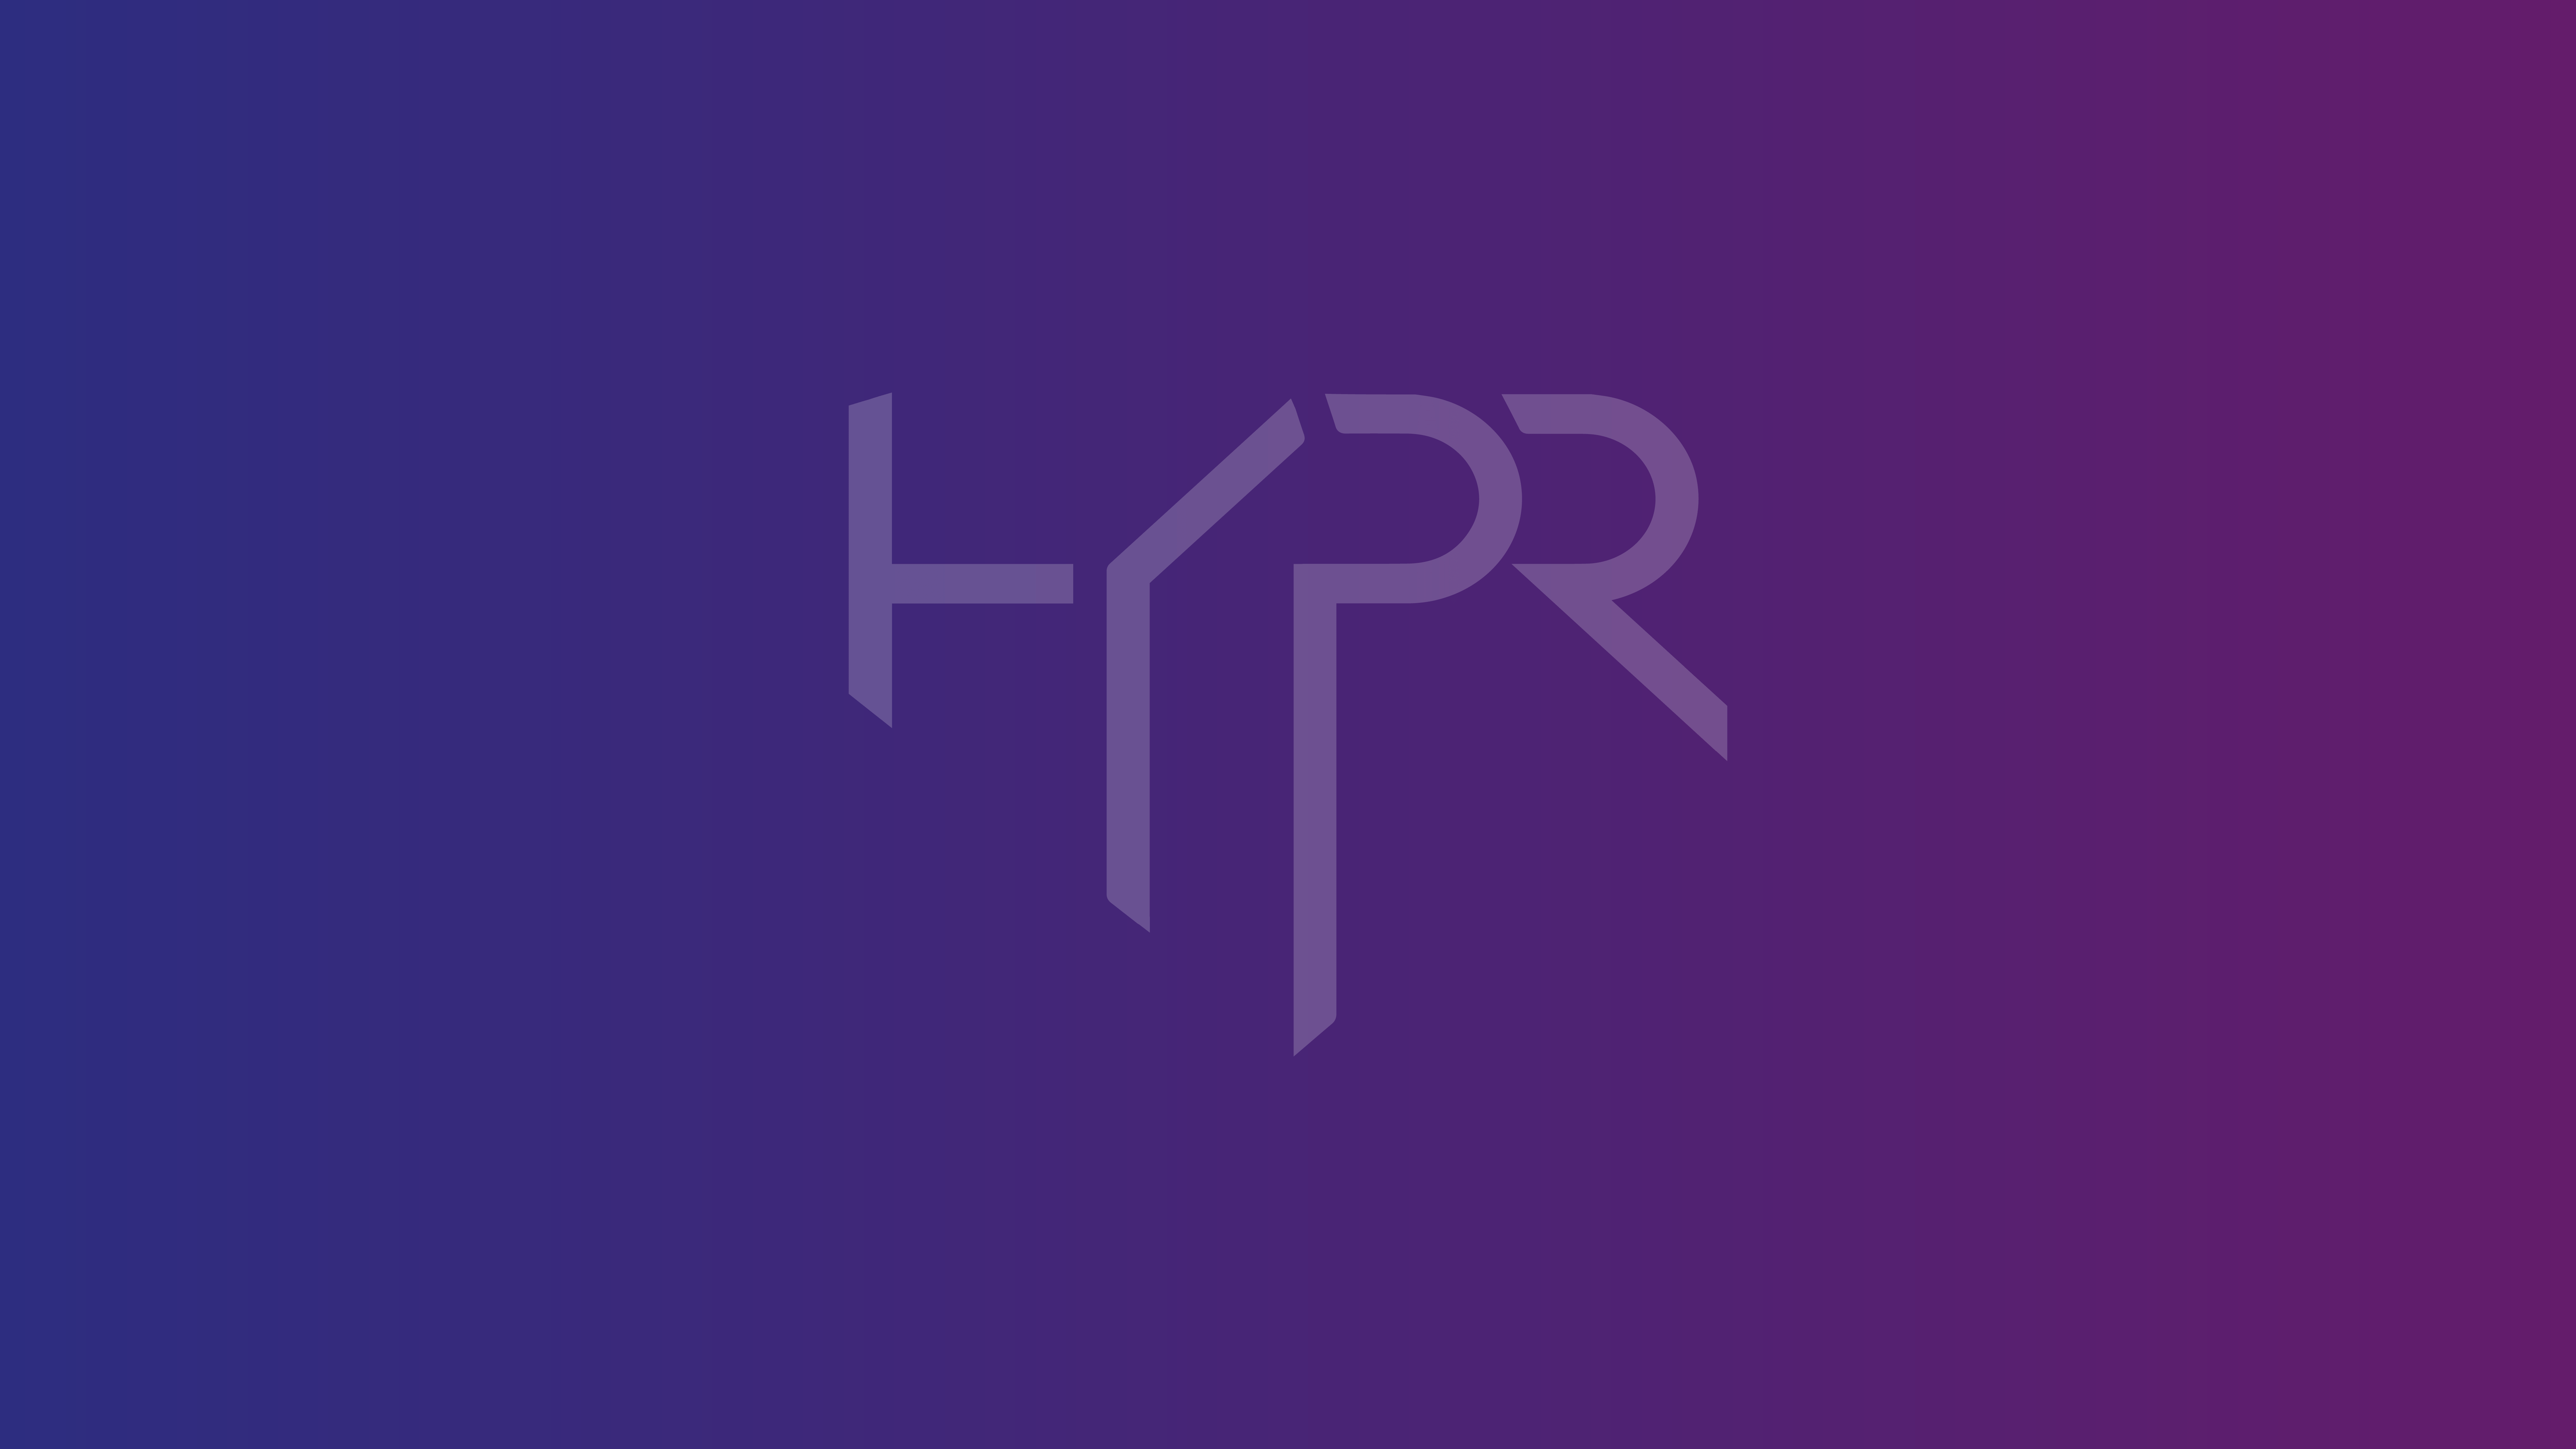 HYPR fixing the way the world logs in